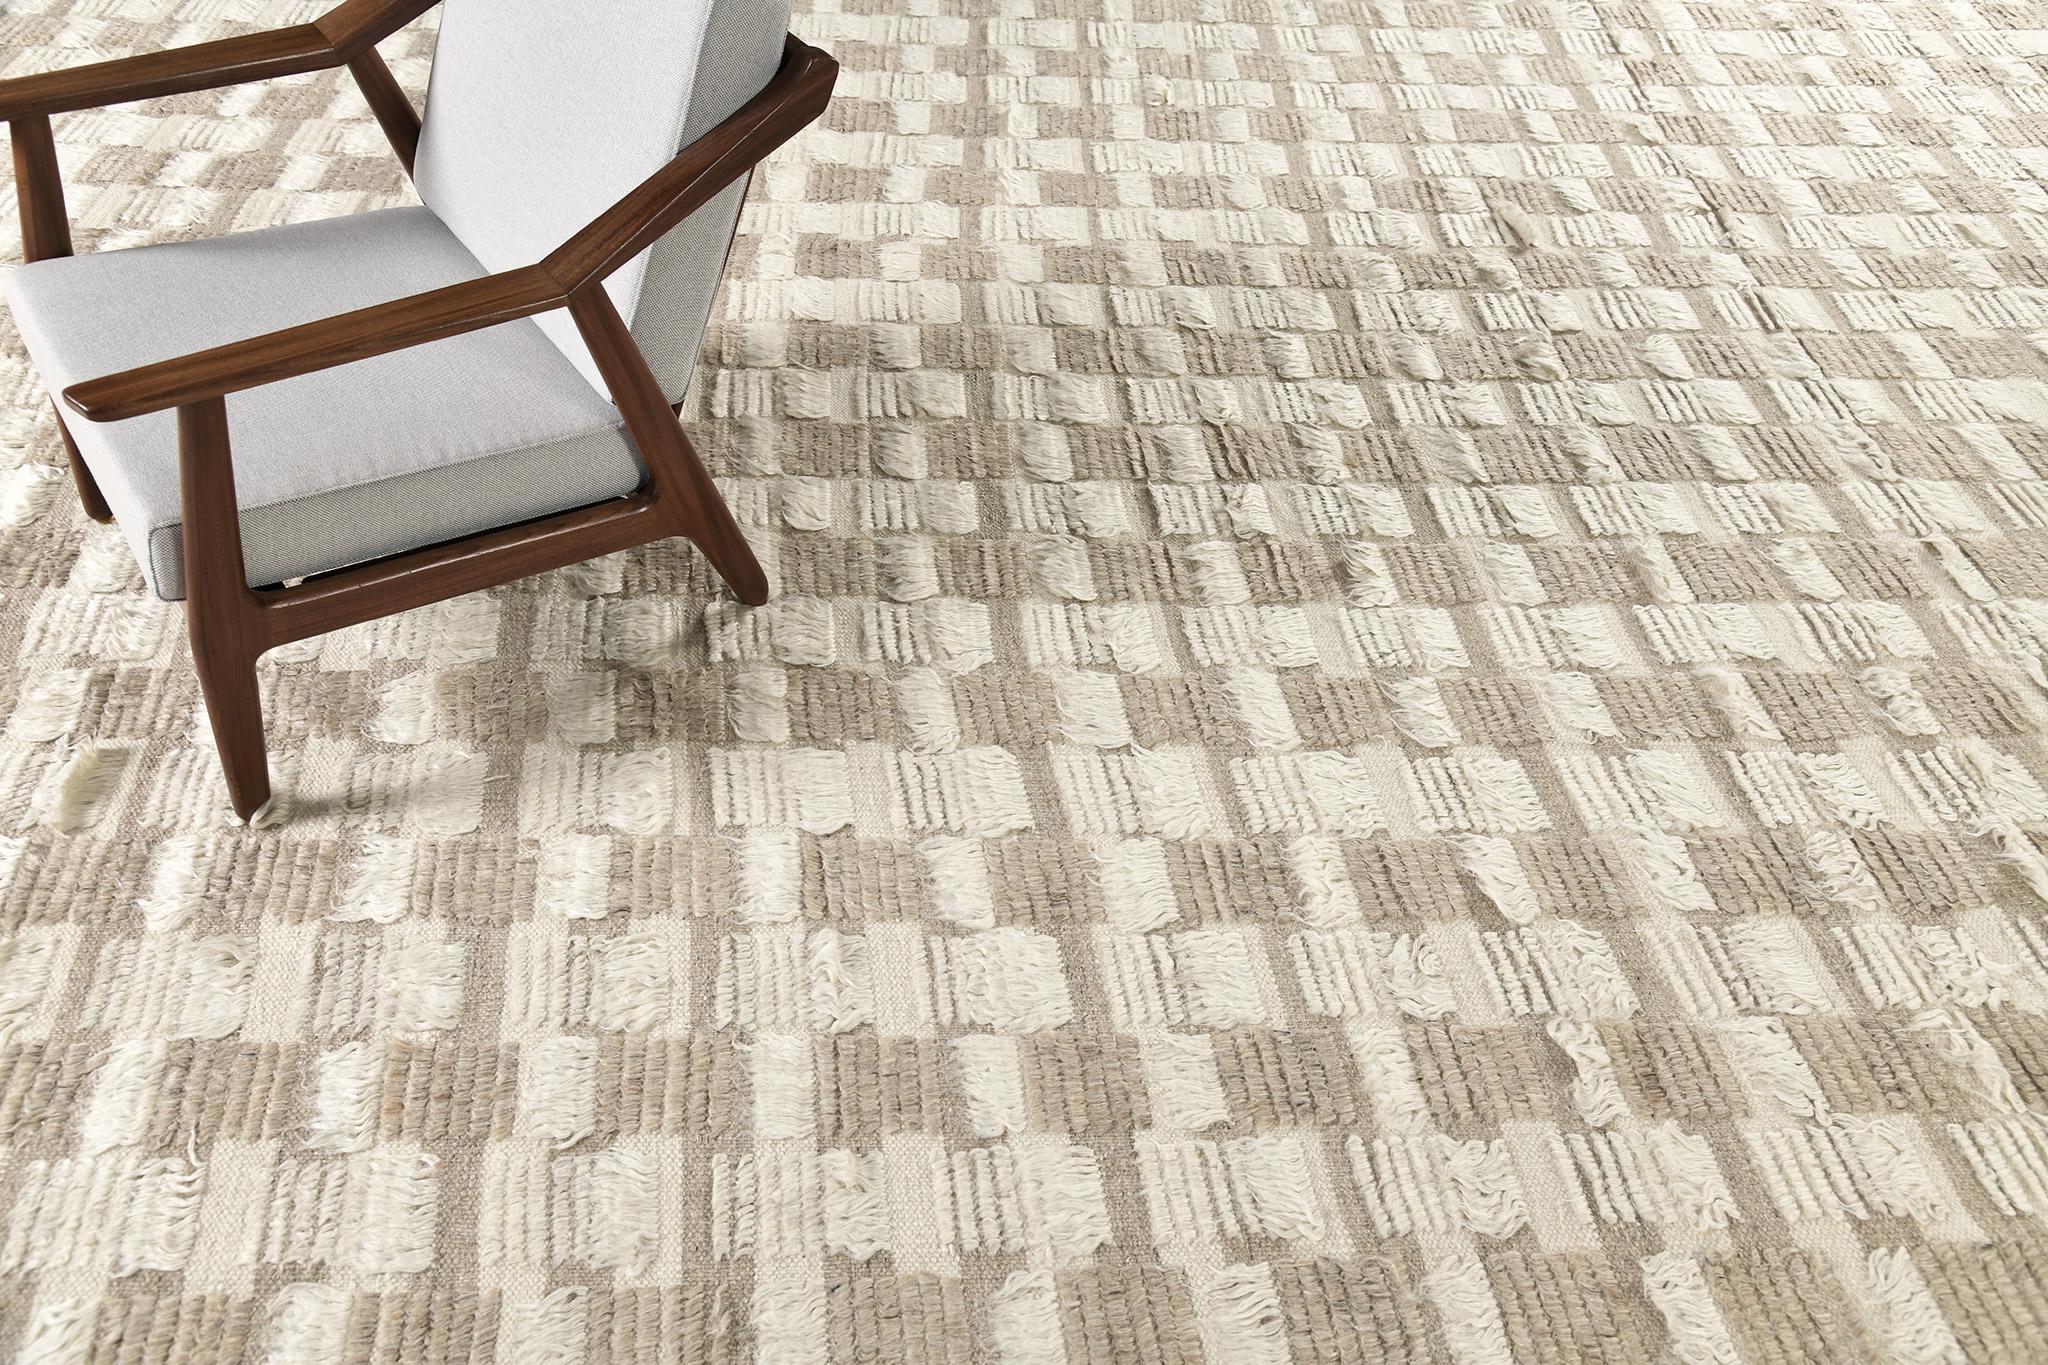 The Amia rug interlaces horizontal stripe patterns of alternating pile heights, with openings of flatweave bands. This bright neutral colorway combines ivory and wheat tones.

An extension of Mehraban’s popular Amihan design, the Sahara Collection